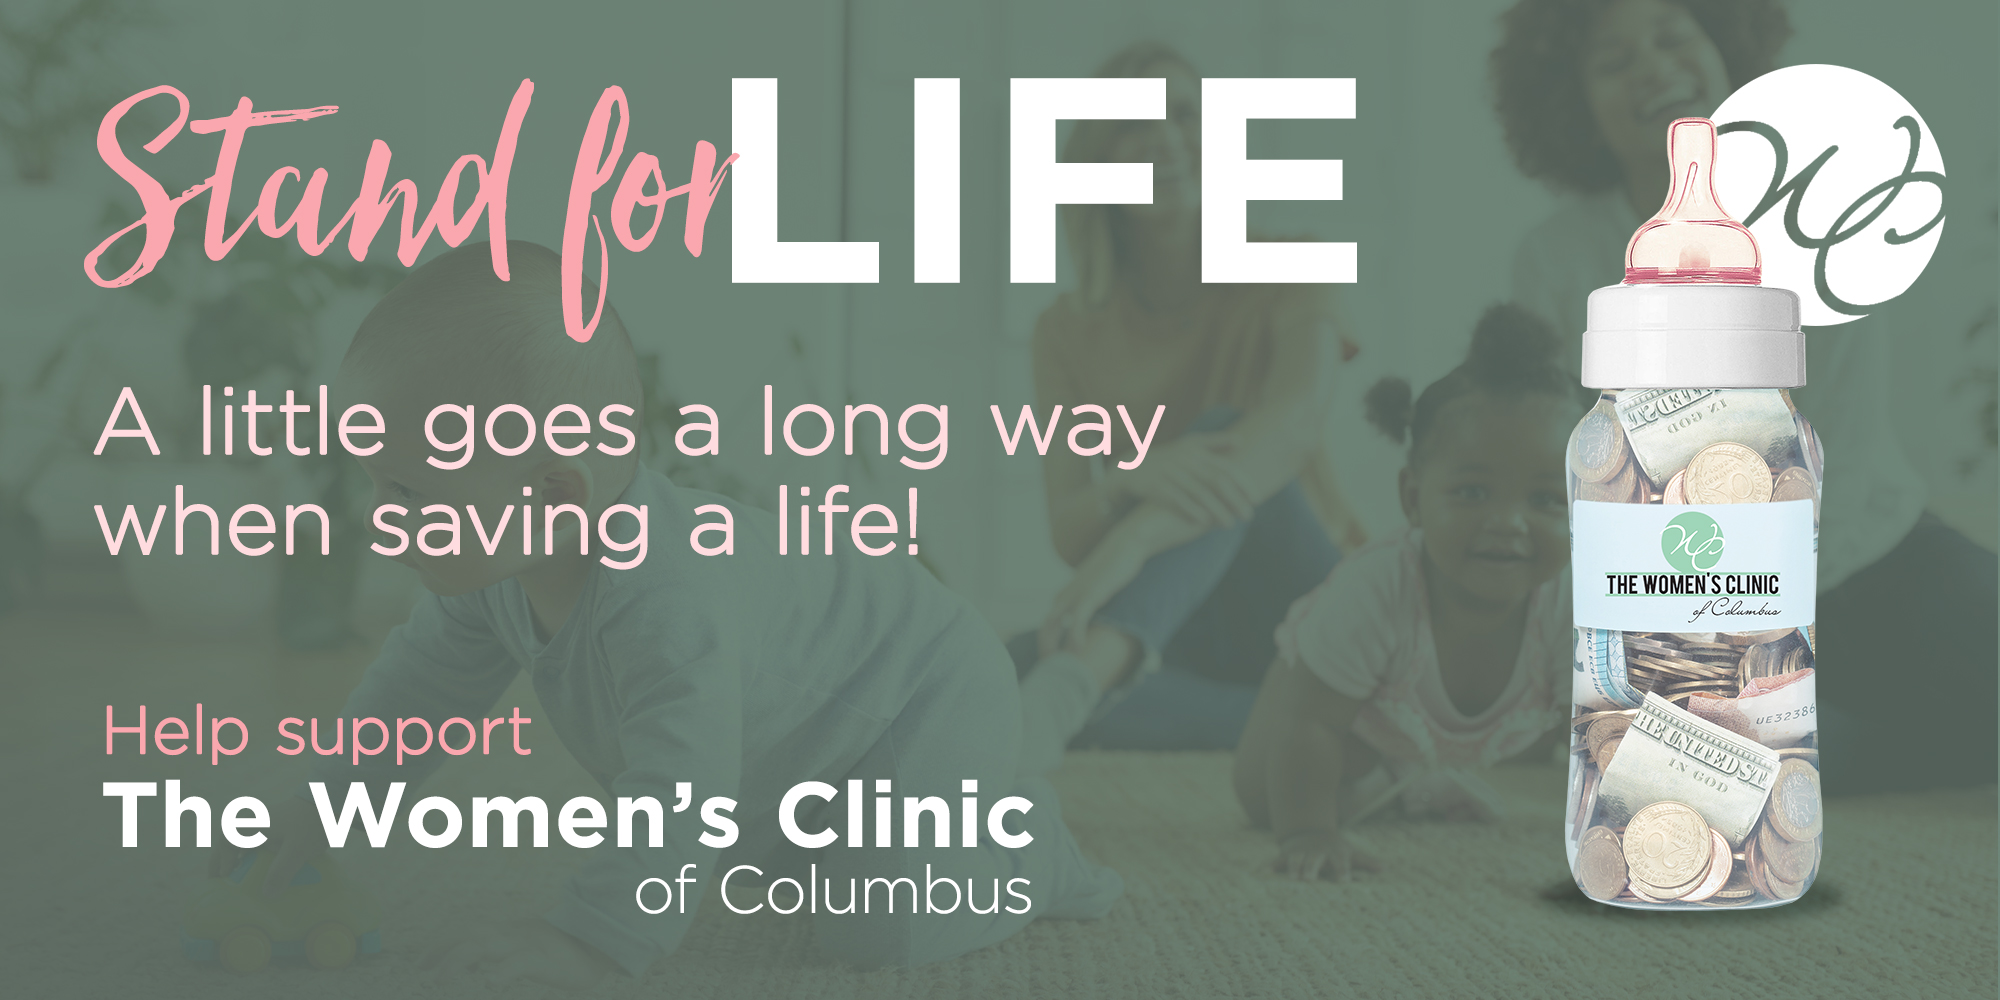 Stand for LIFE A little goes a long way when saving a life! Help support The Women's Clinic of Columbus